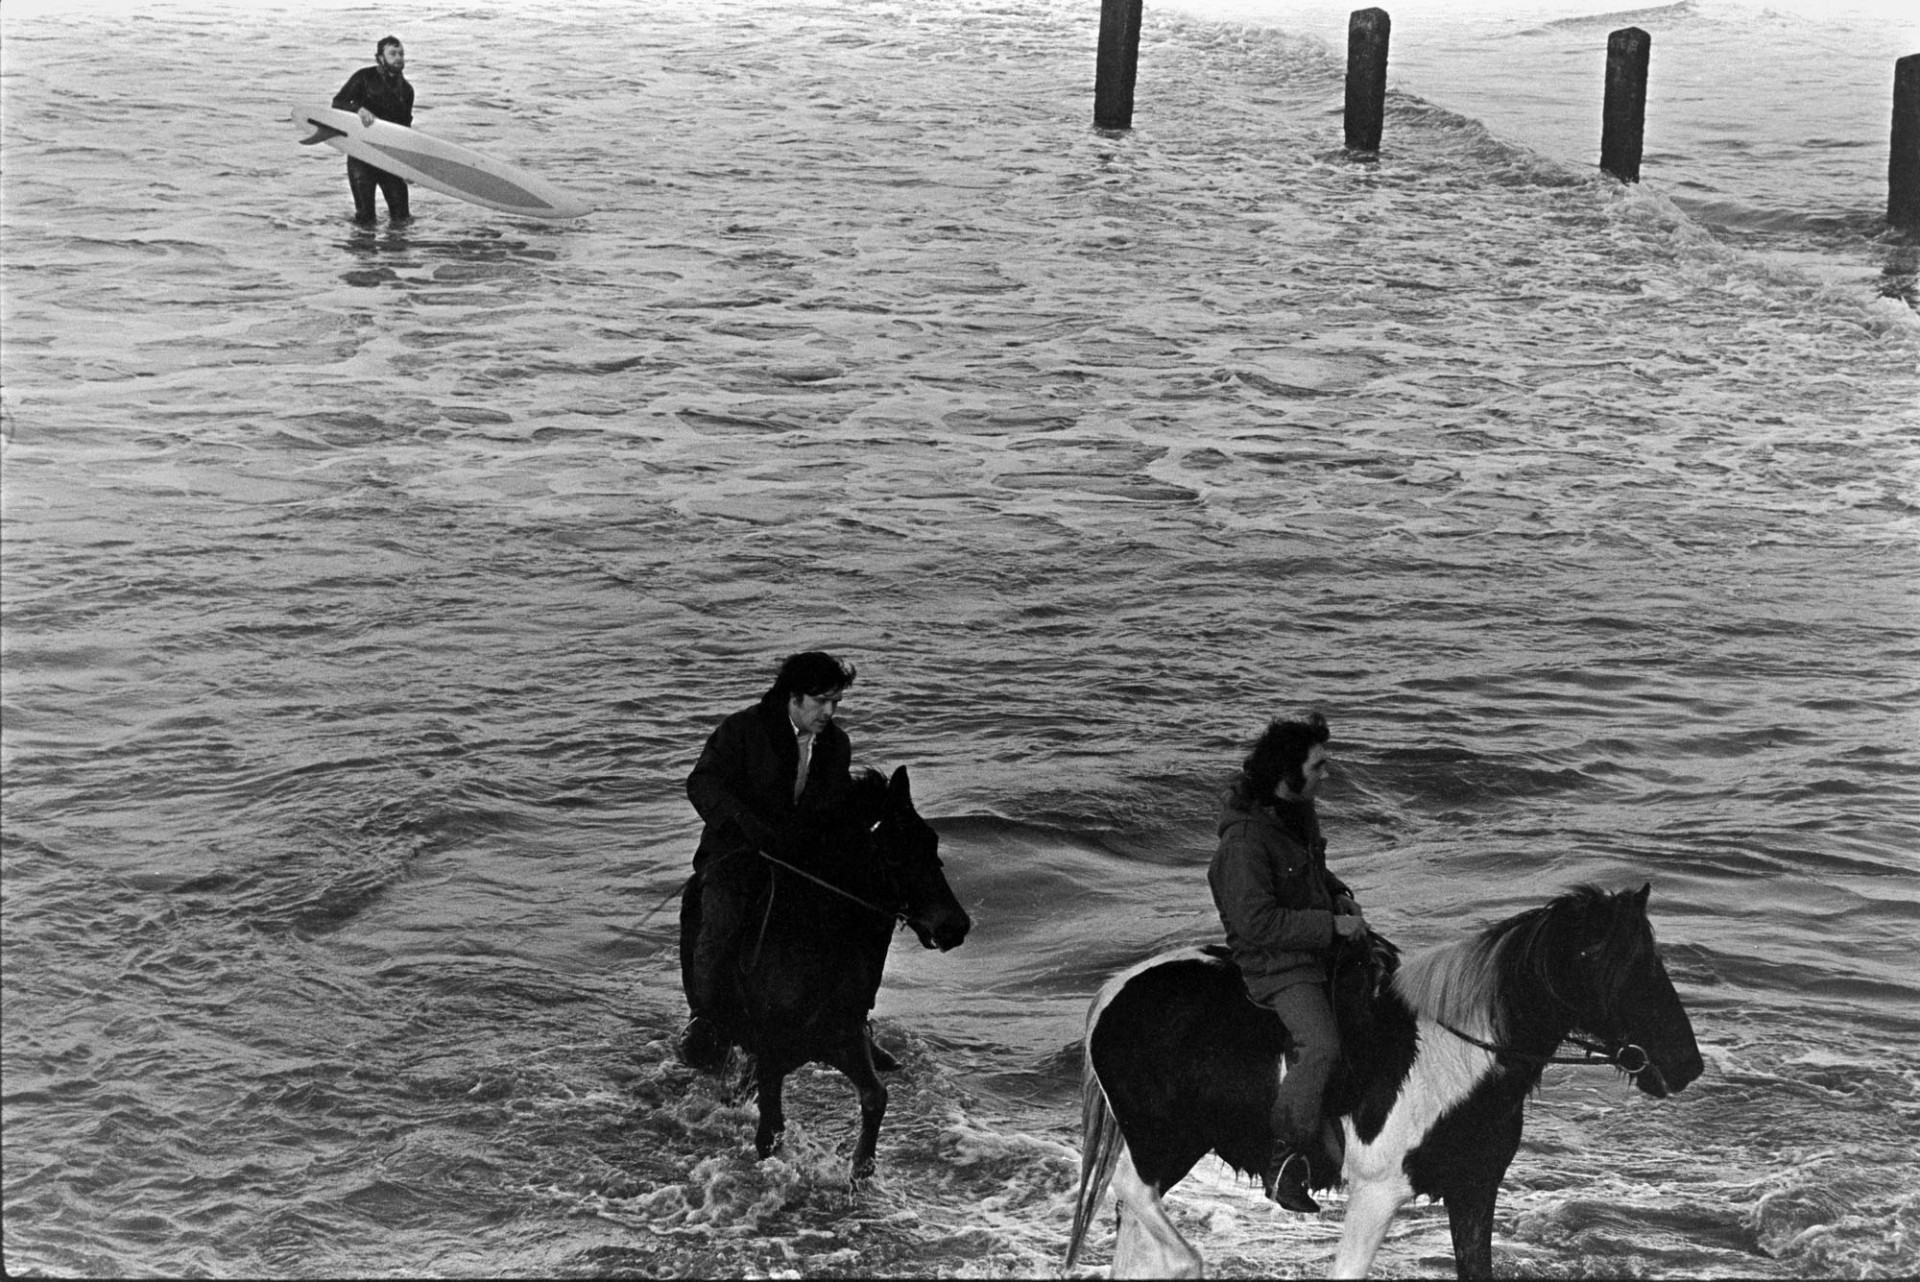 Two men riding horses along the shoreline in the sea, by a sea groyne, at Westward Ho! A surfer is following them out of the sea.